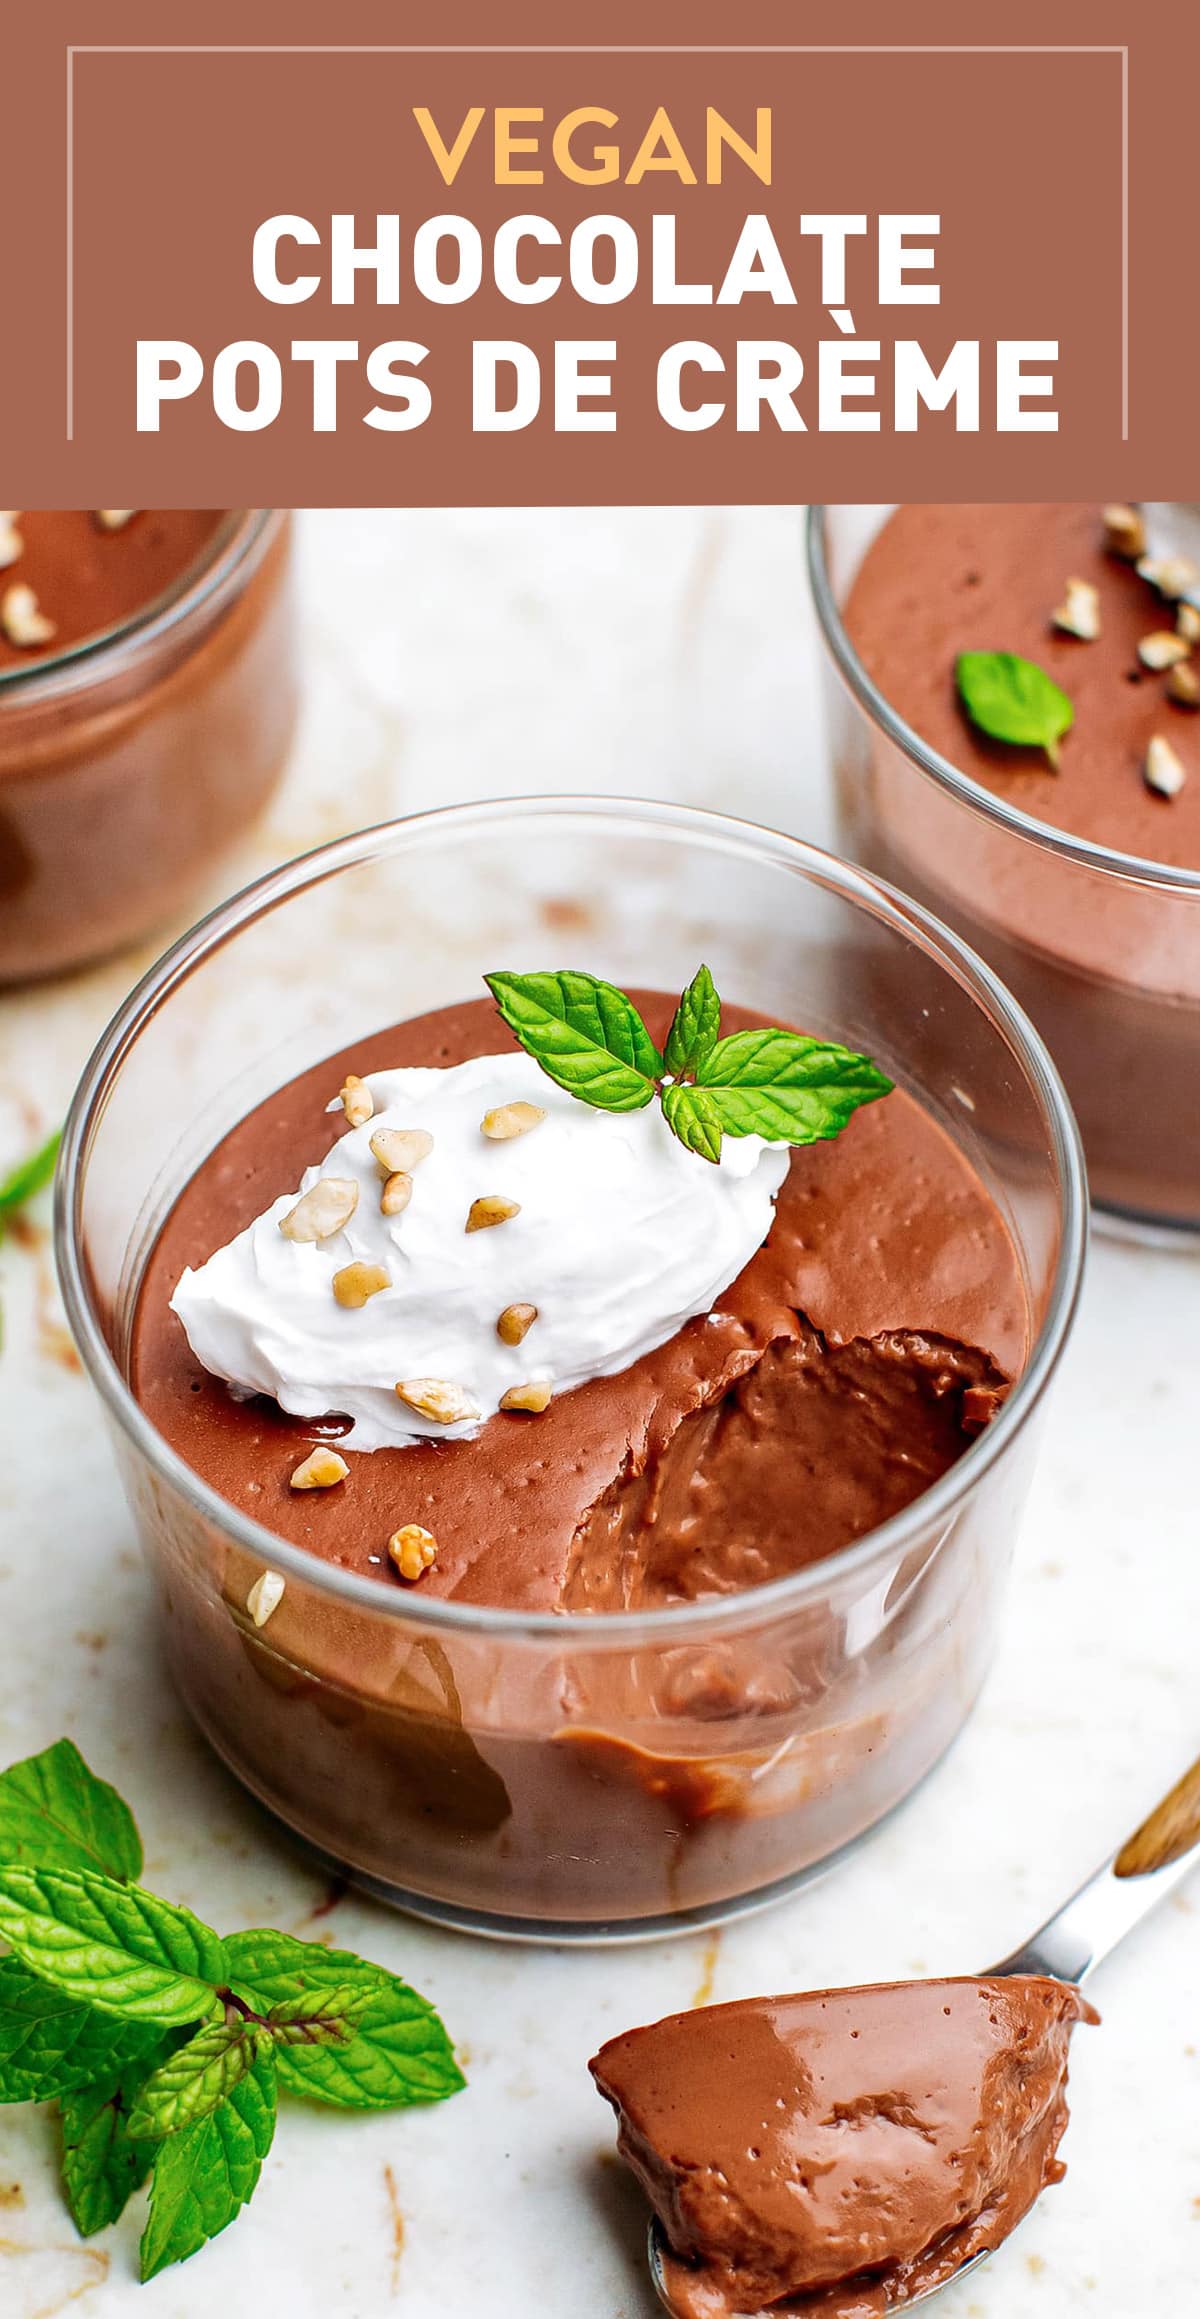 These vegan chocolate pots de crème are velvety smooth, irresistibly creamy, and so decadent! This plant-based take on the classic French dessert is prepared with 6 simple everyday ingredients such as almond milk, coconut cream, and dark chocolate. Plus, this recipe is tofu and cashew-free! #vegan #chocolate #dessert